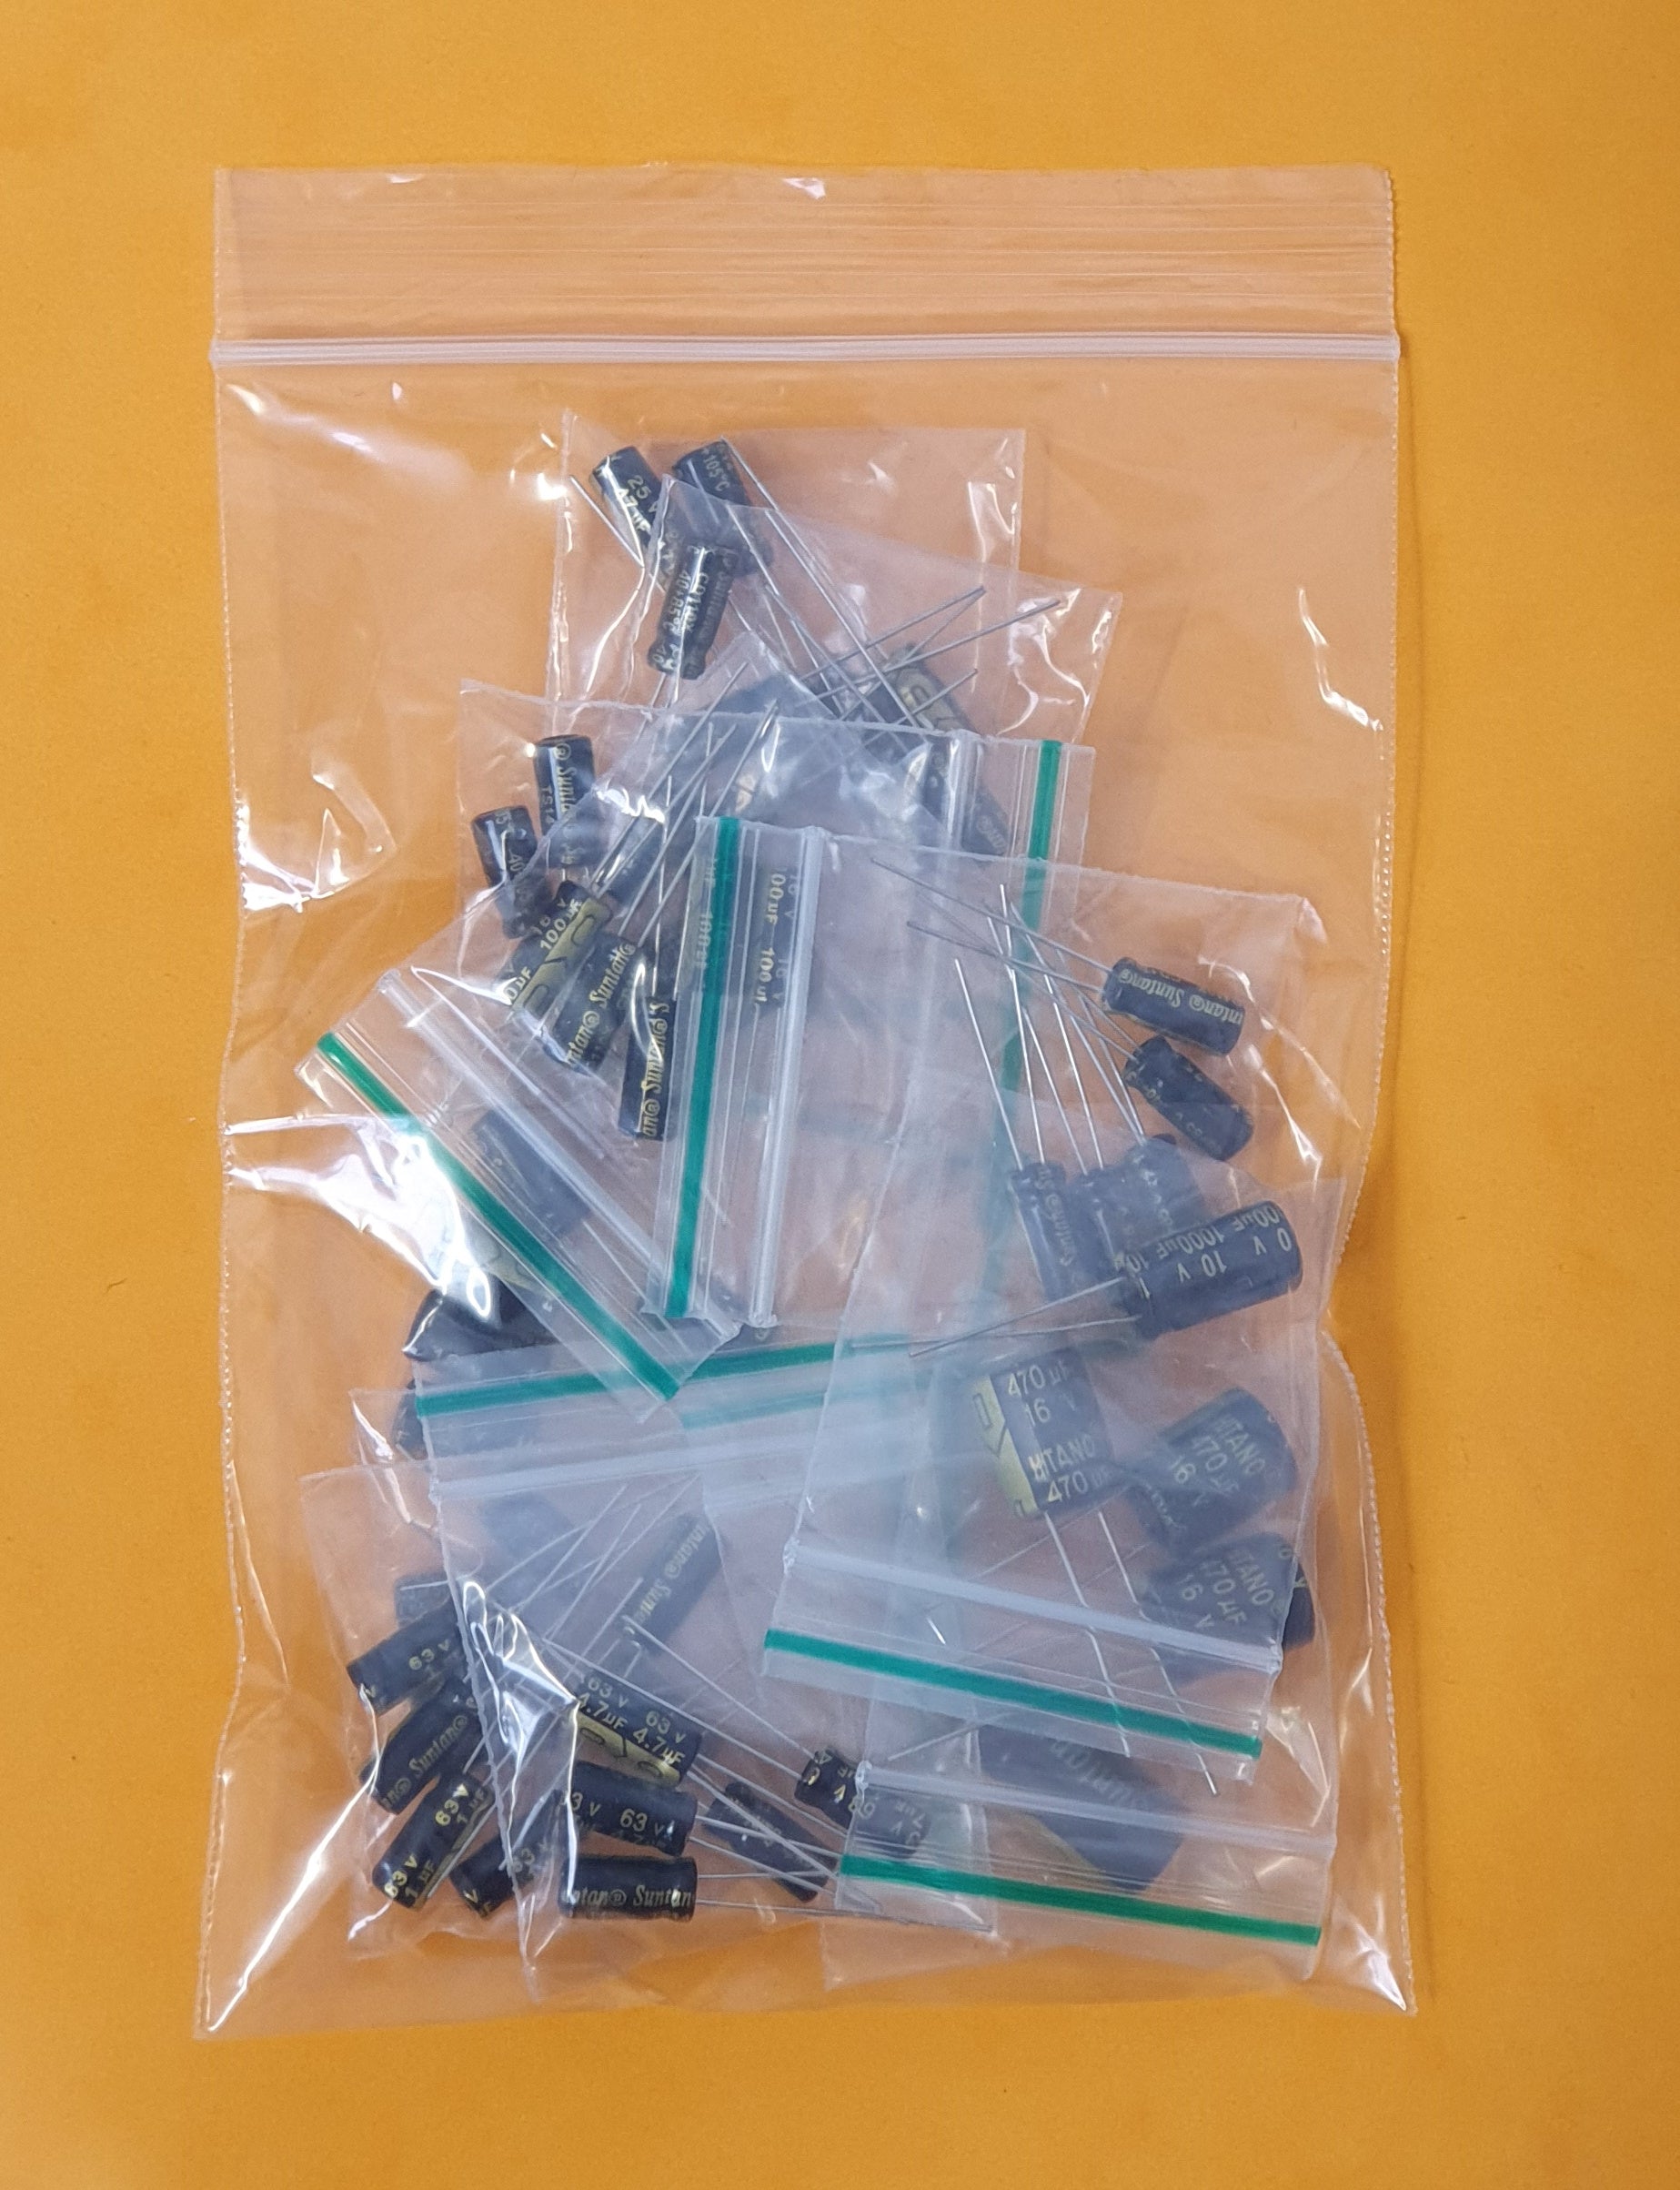 50pc Electrolytic Capacitor Kit 12 Common Values 105 Deg. Aluminium Electrolytic Capacitors